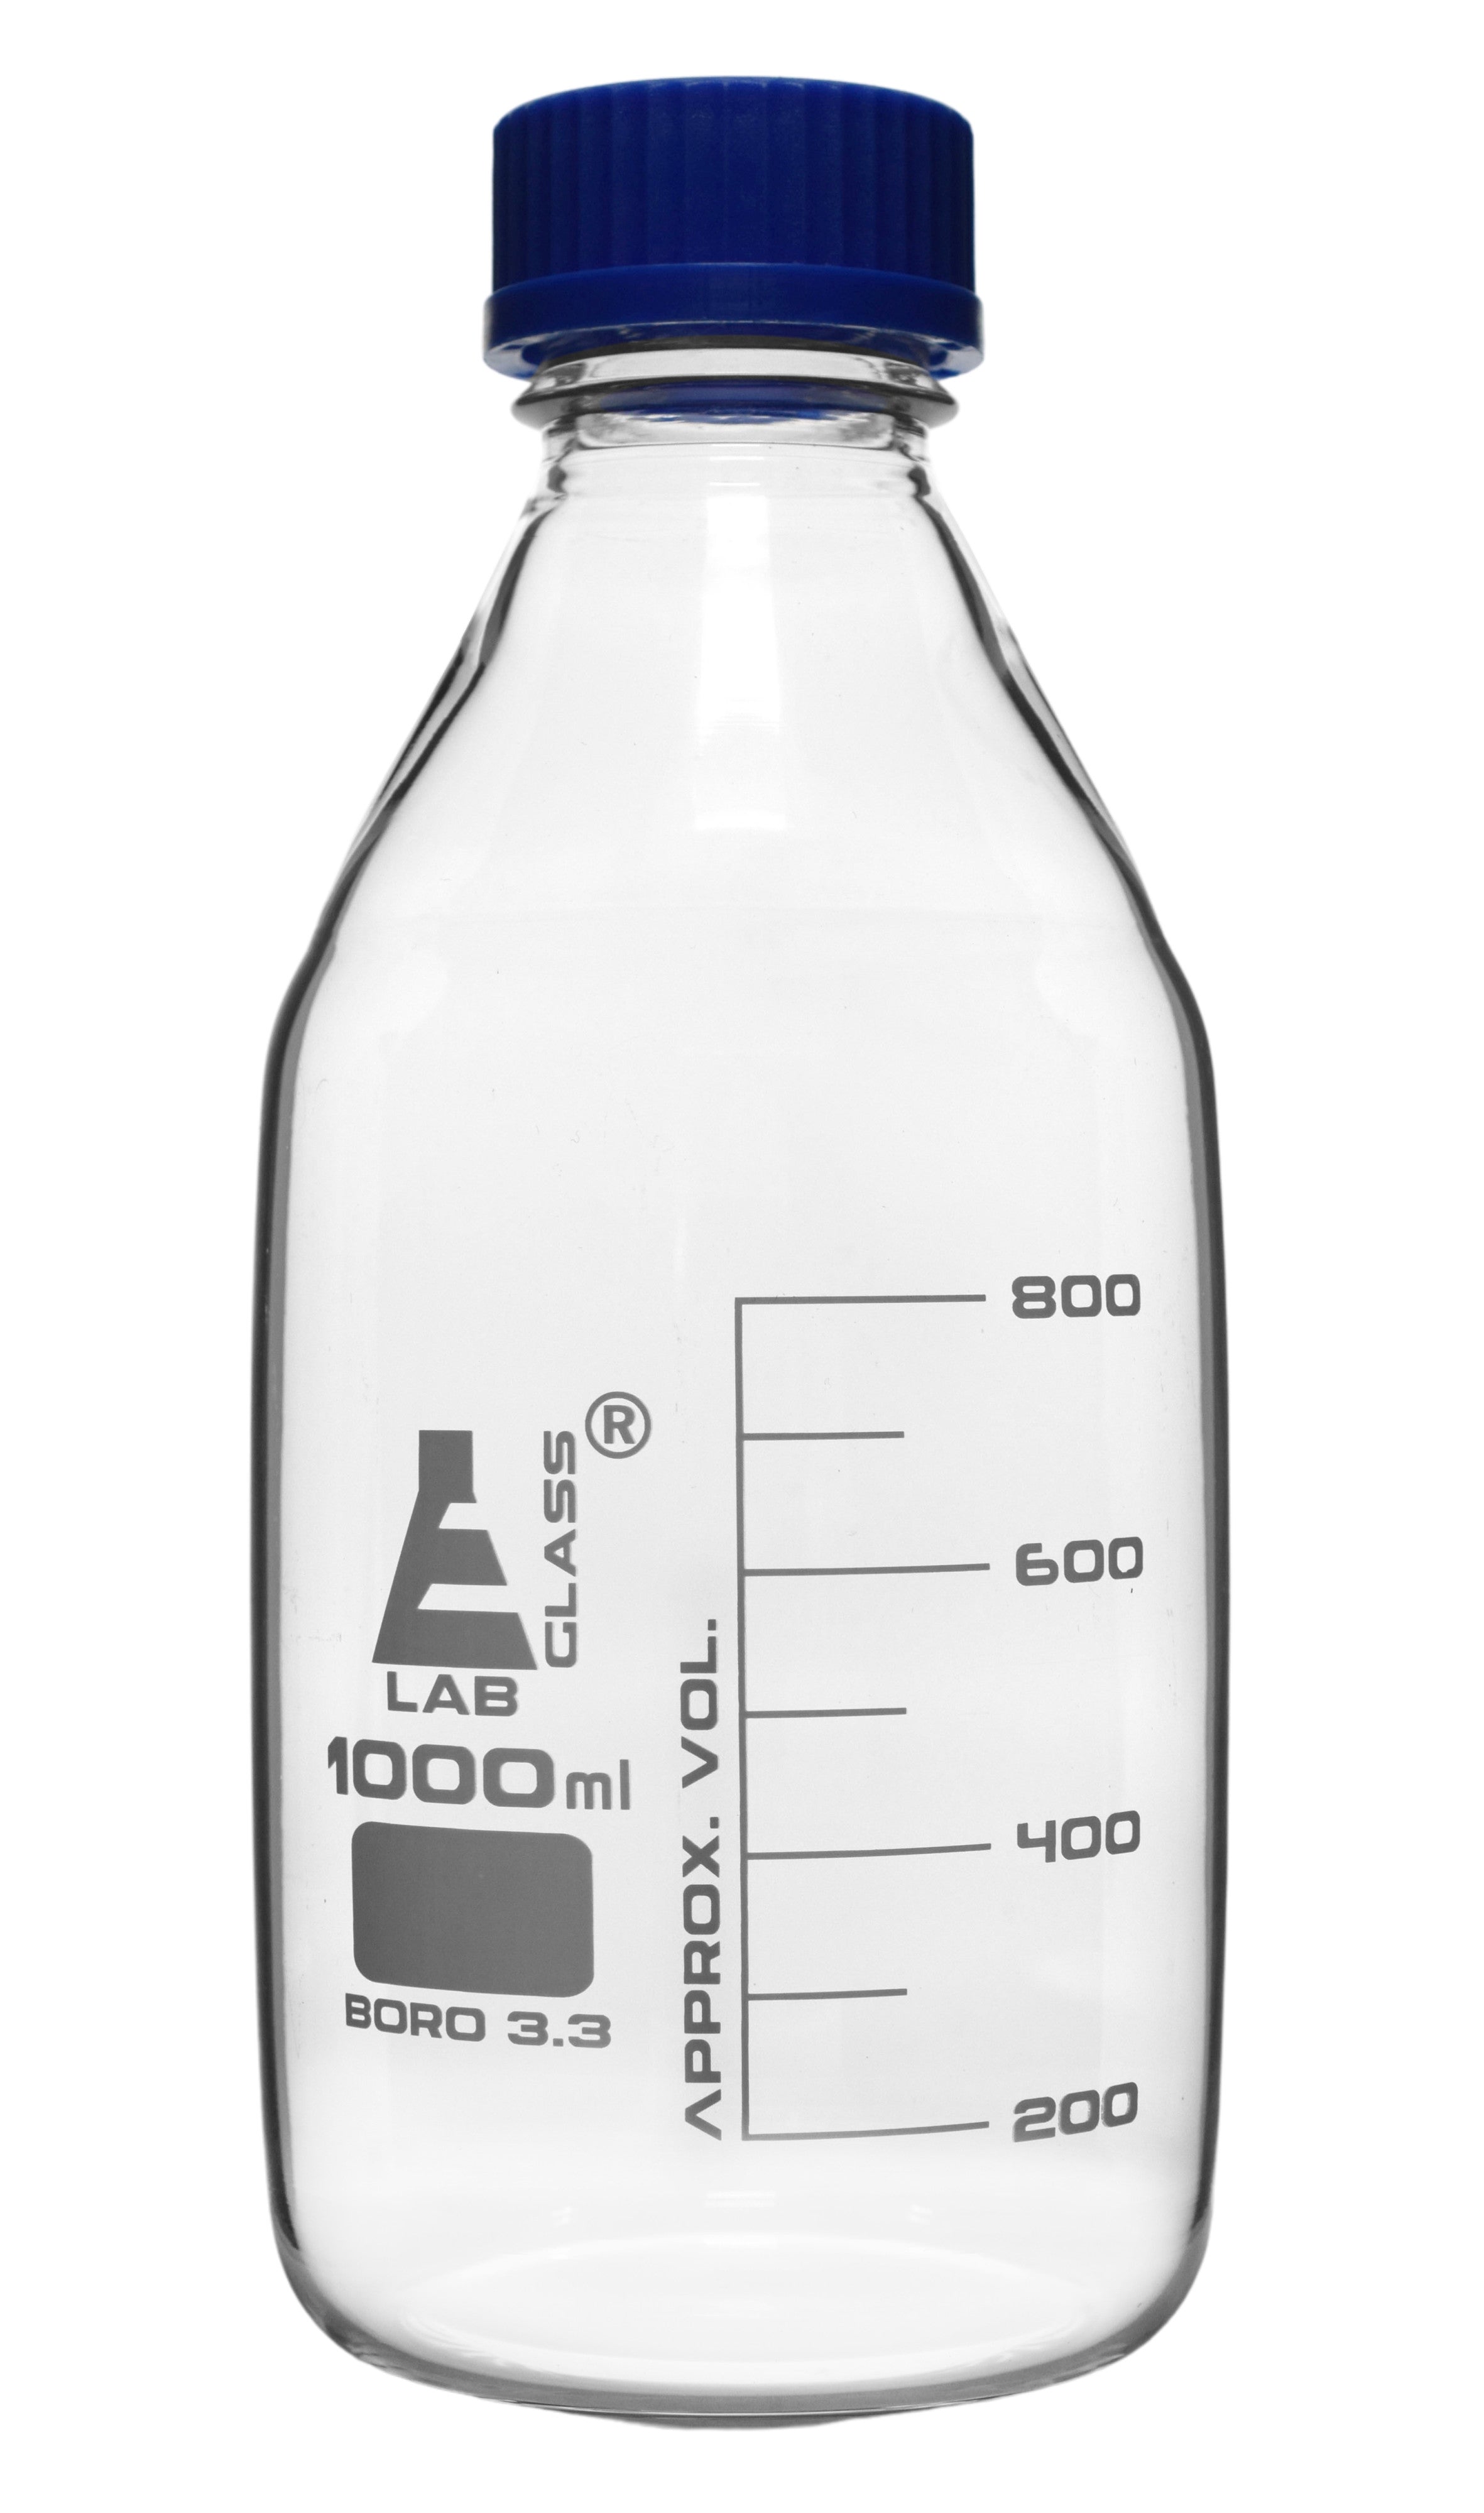 Clear Borosilicate Glass Reagent Bottle with Screw Cap, 1000 ml with Graduations, Autoclavable